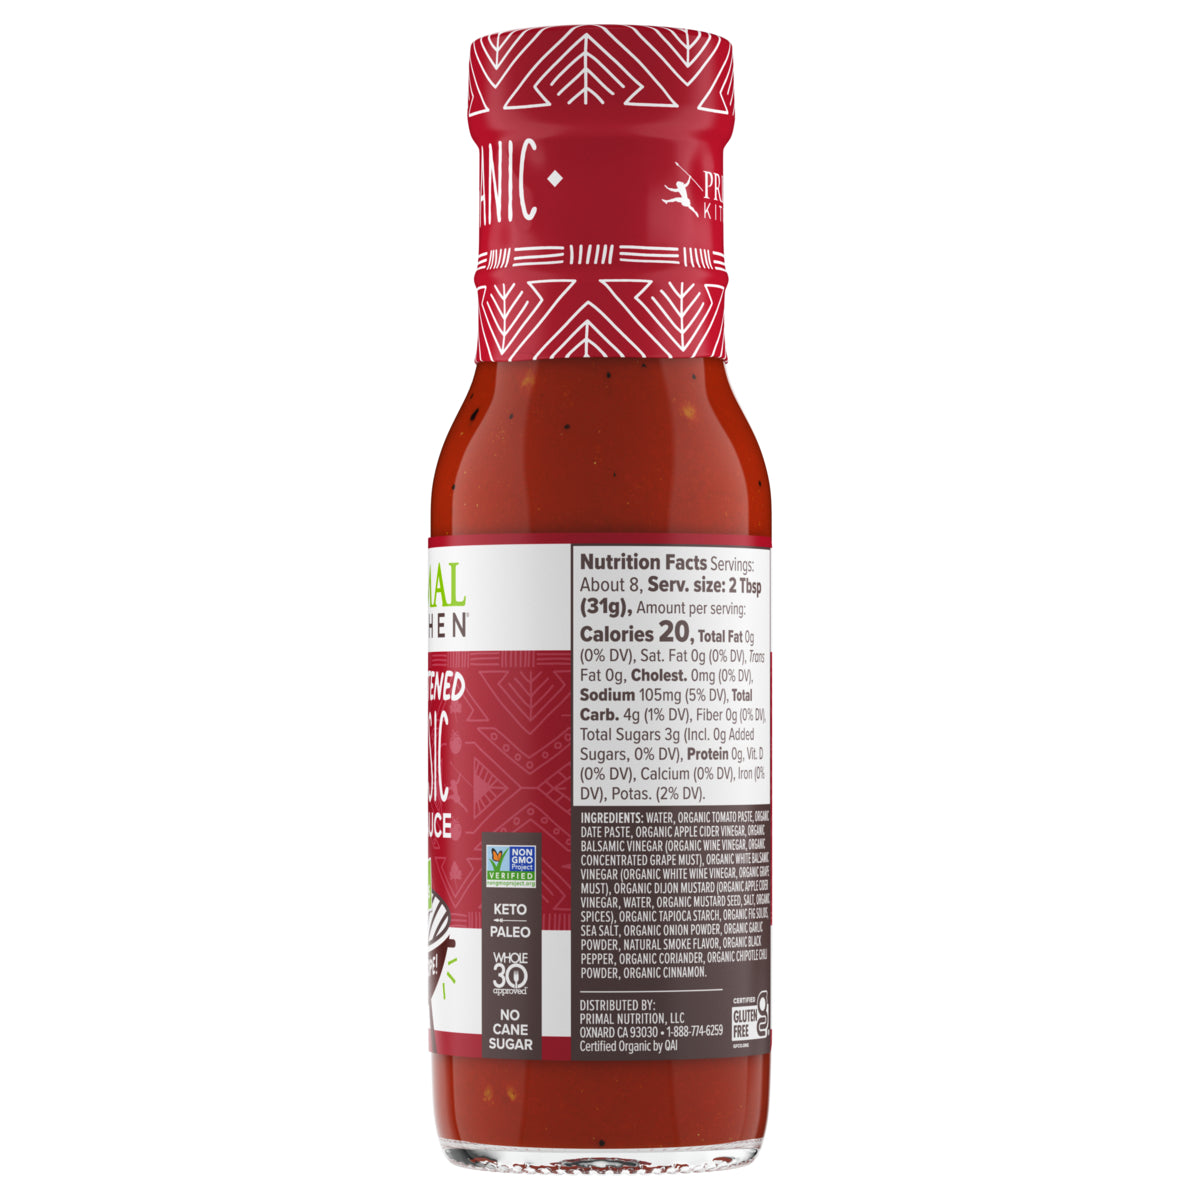 Backside of Primal Kitchen Organic Unsweetened Classic BBQ Sauce Bottle showing nutrition facts and ingredients list